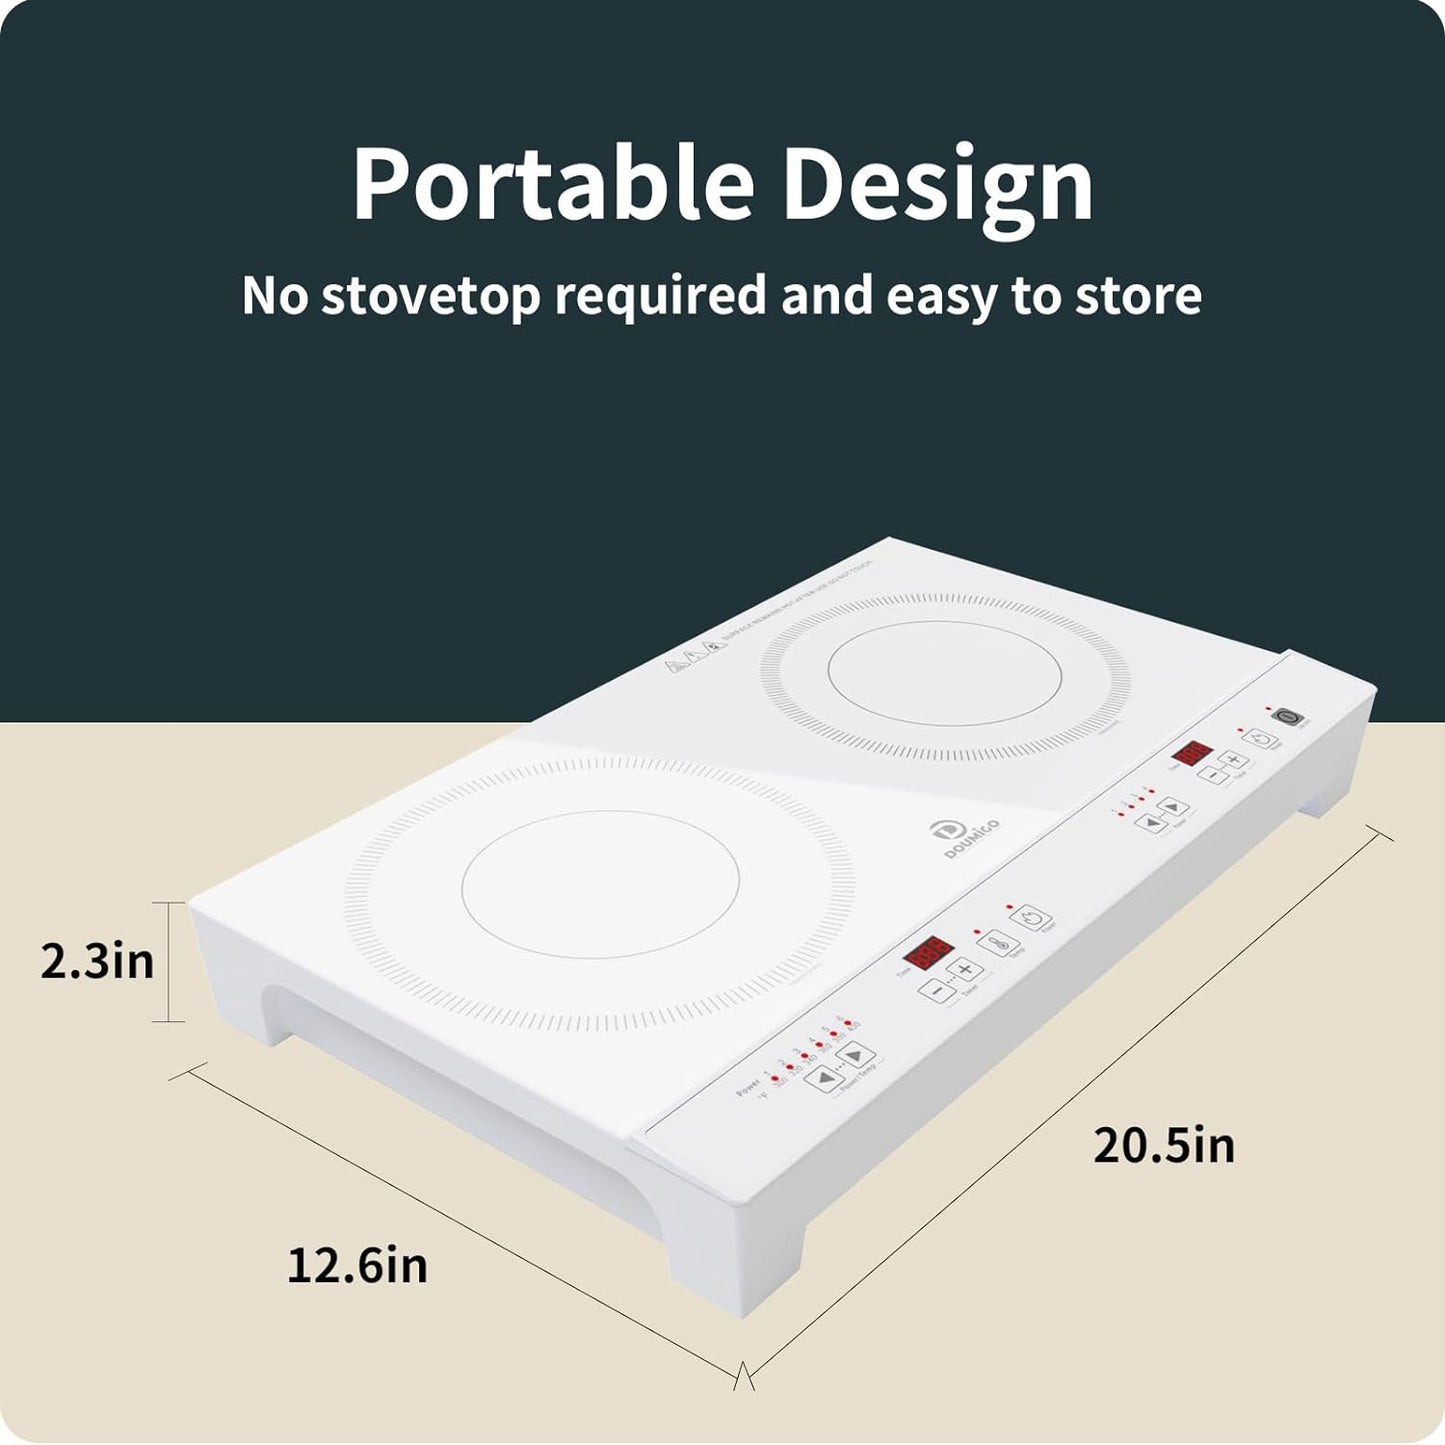 Doumigo Double Induction Cooktop, Portable Electric Stove with 2 Burners, 120V, 1800W, 12 Inches, Temperature Control, Kid Safety Lock, Timer